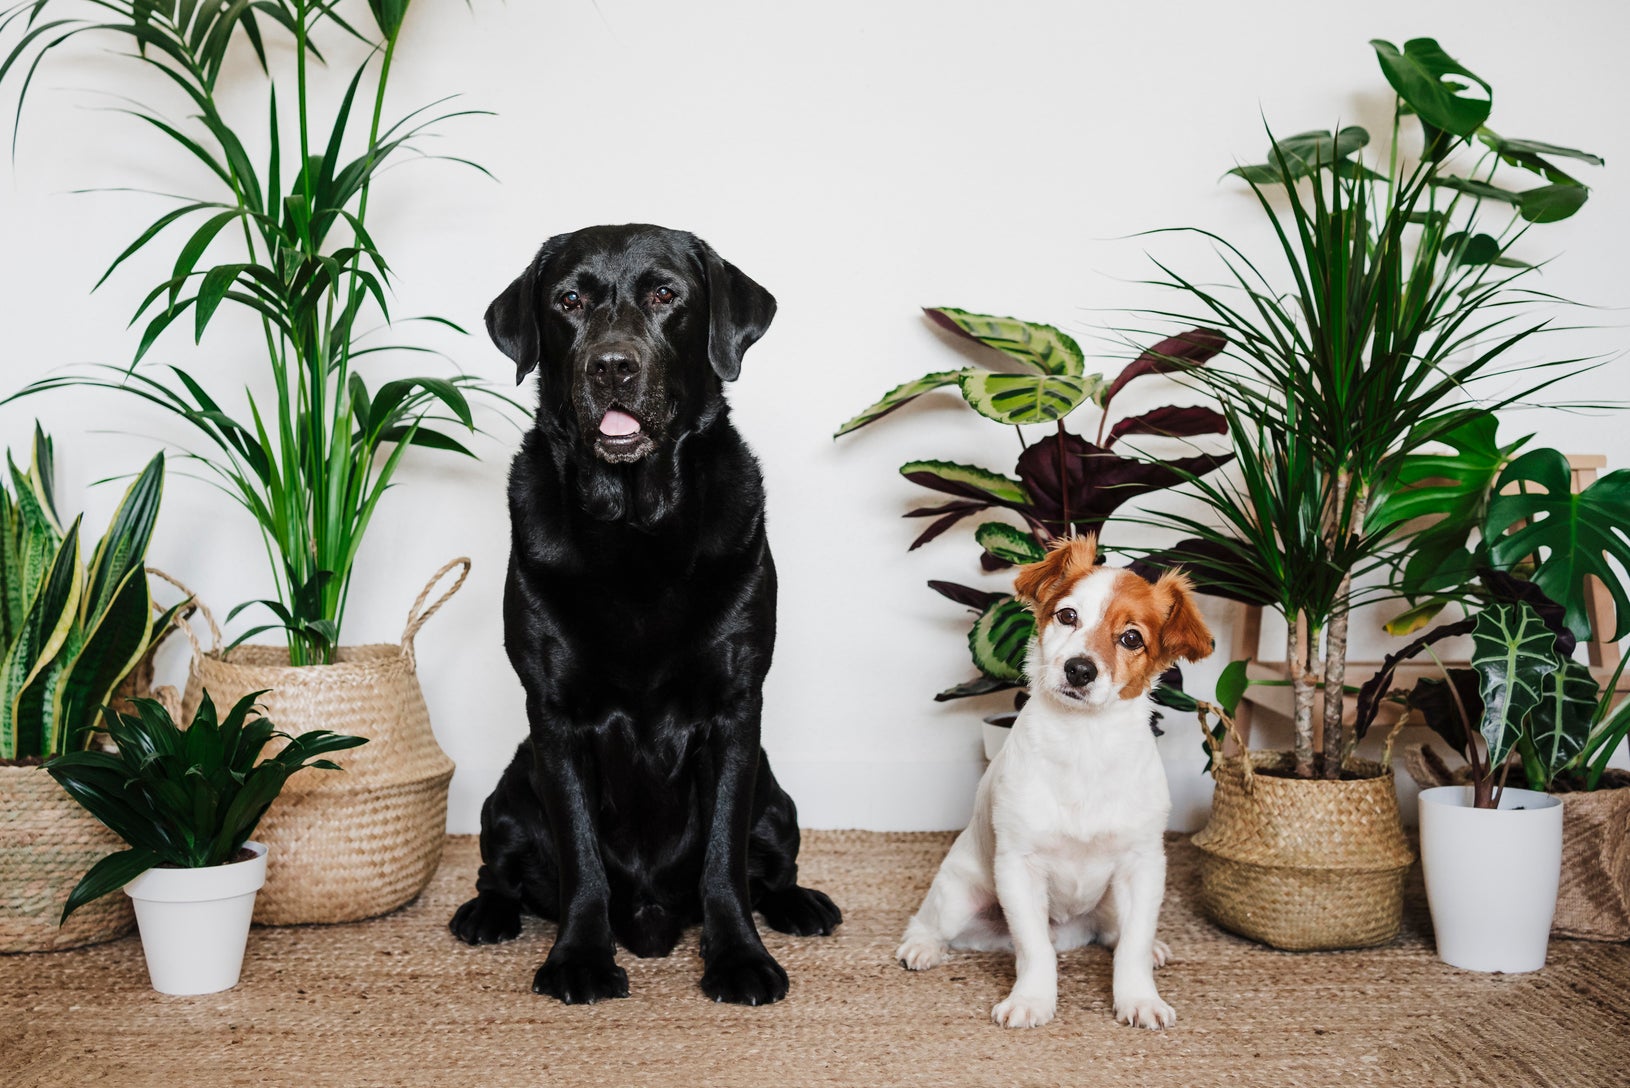 Two dogs, one large and black, one small and white with brown spots, sitting amongst houseplants